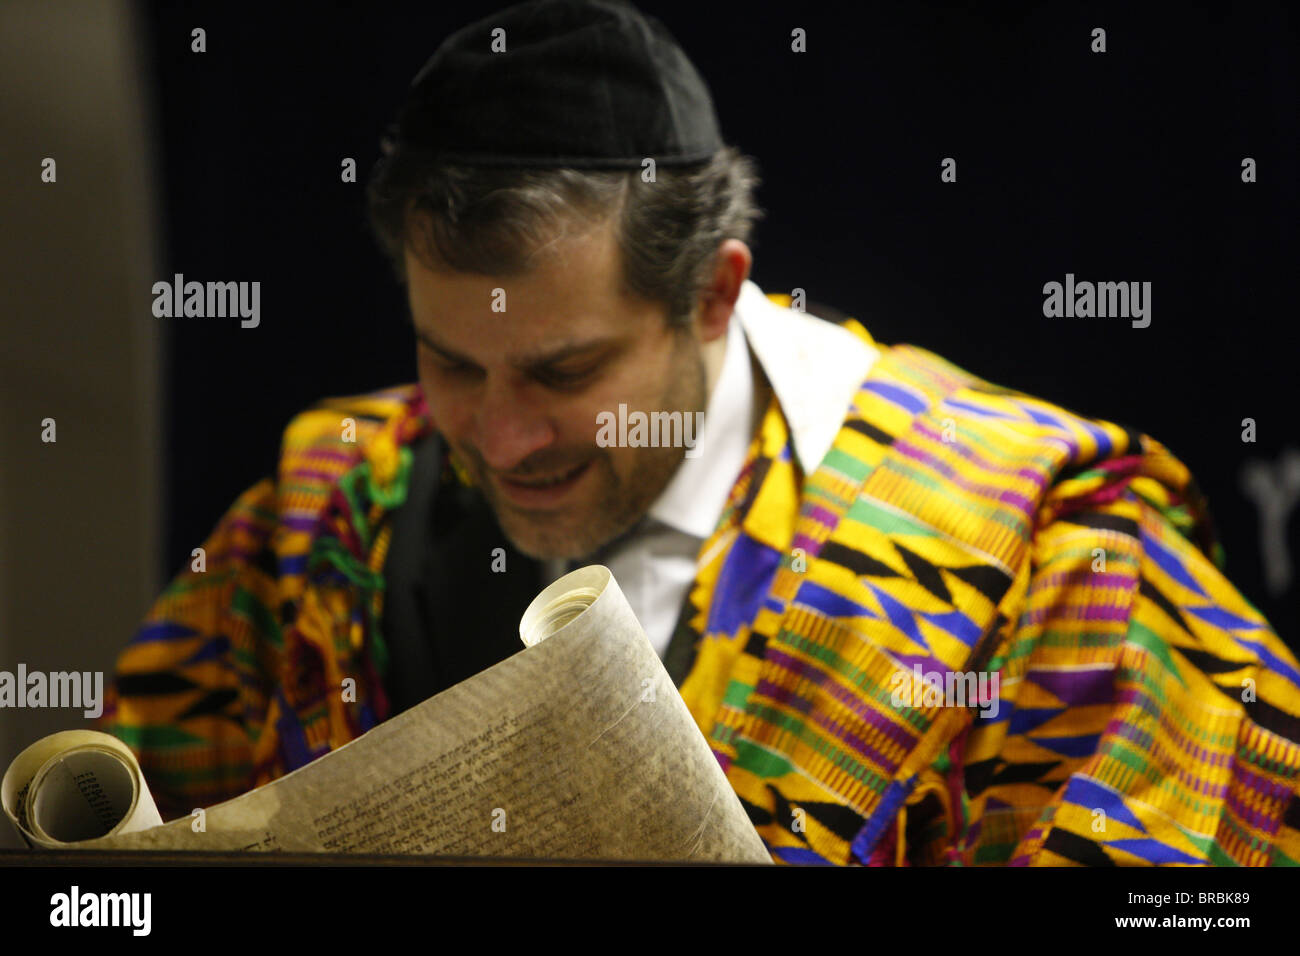 Book of Esther (Meguilah), Purim celebration in a Liberal synagogue, Paris, France Stock Photo